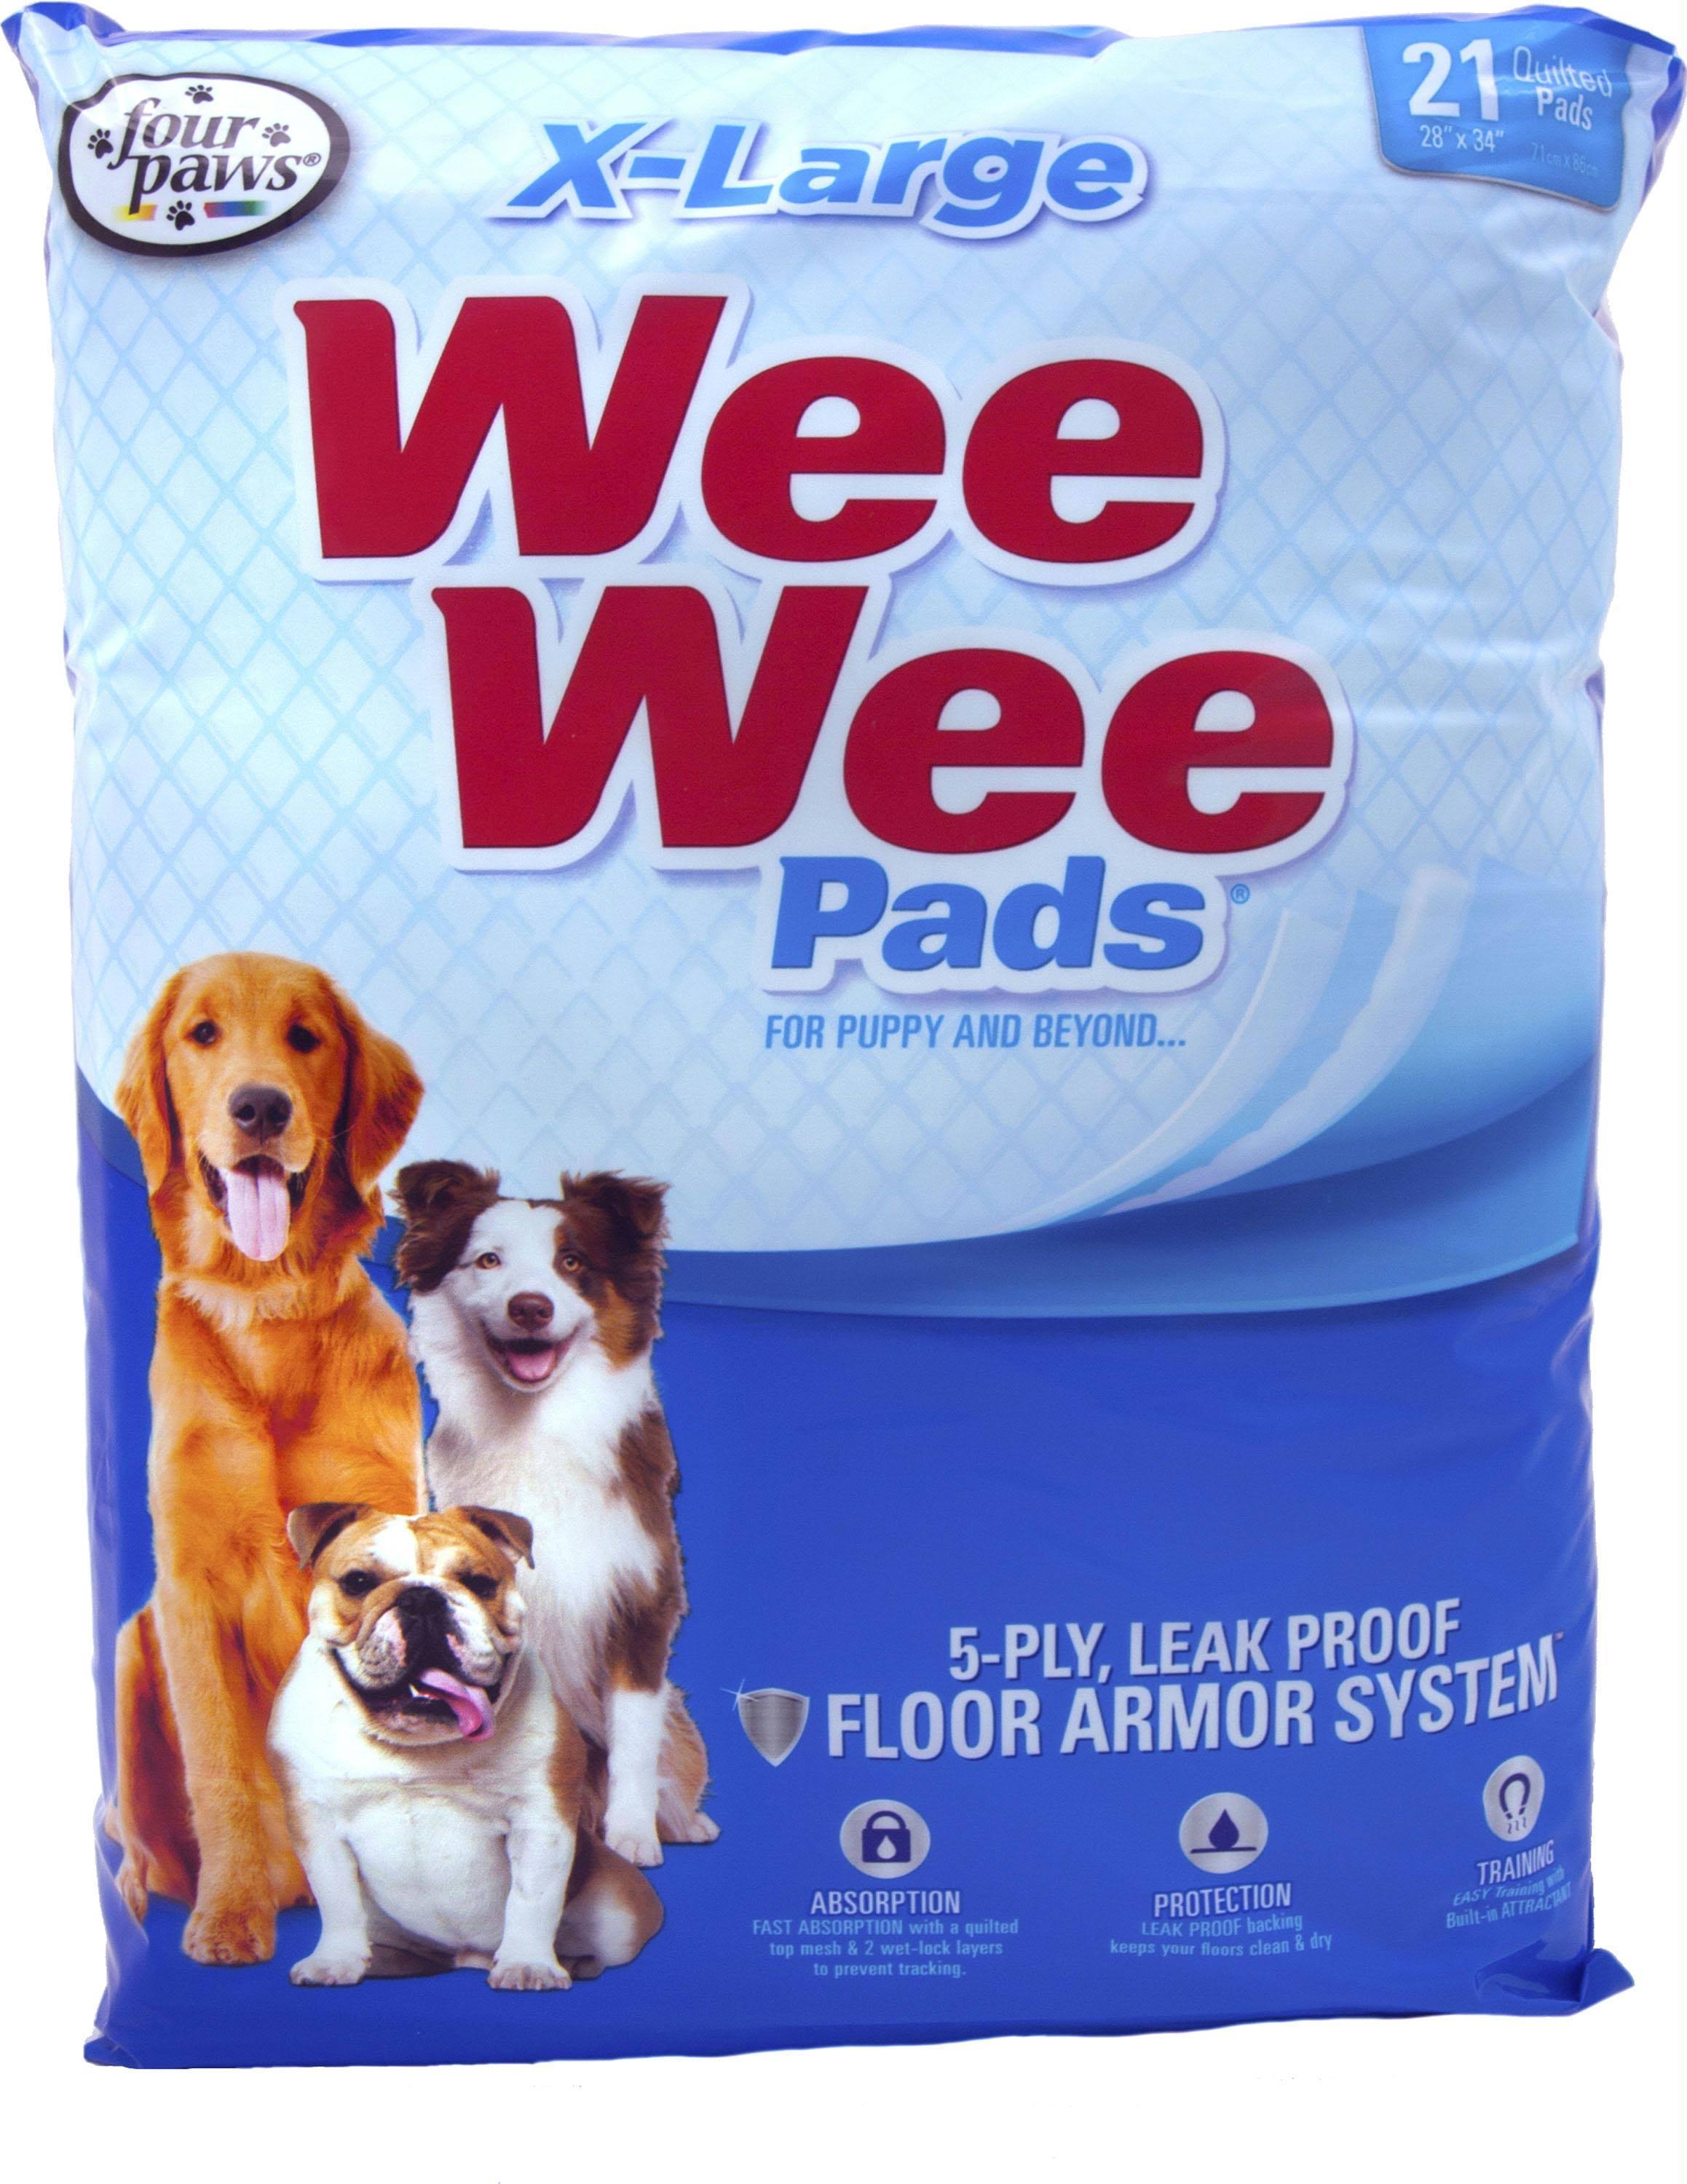 Four Paws - Wee Wee Pads XLarge- 21 Pack - 100202095-01648